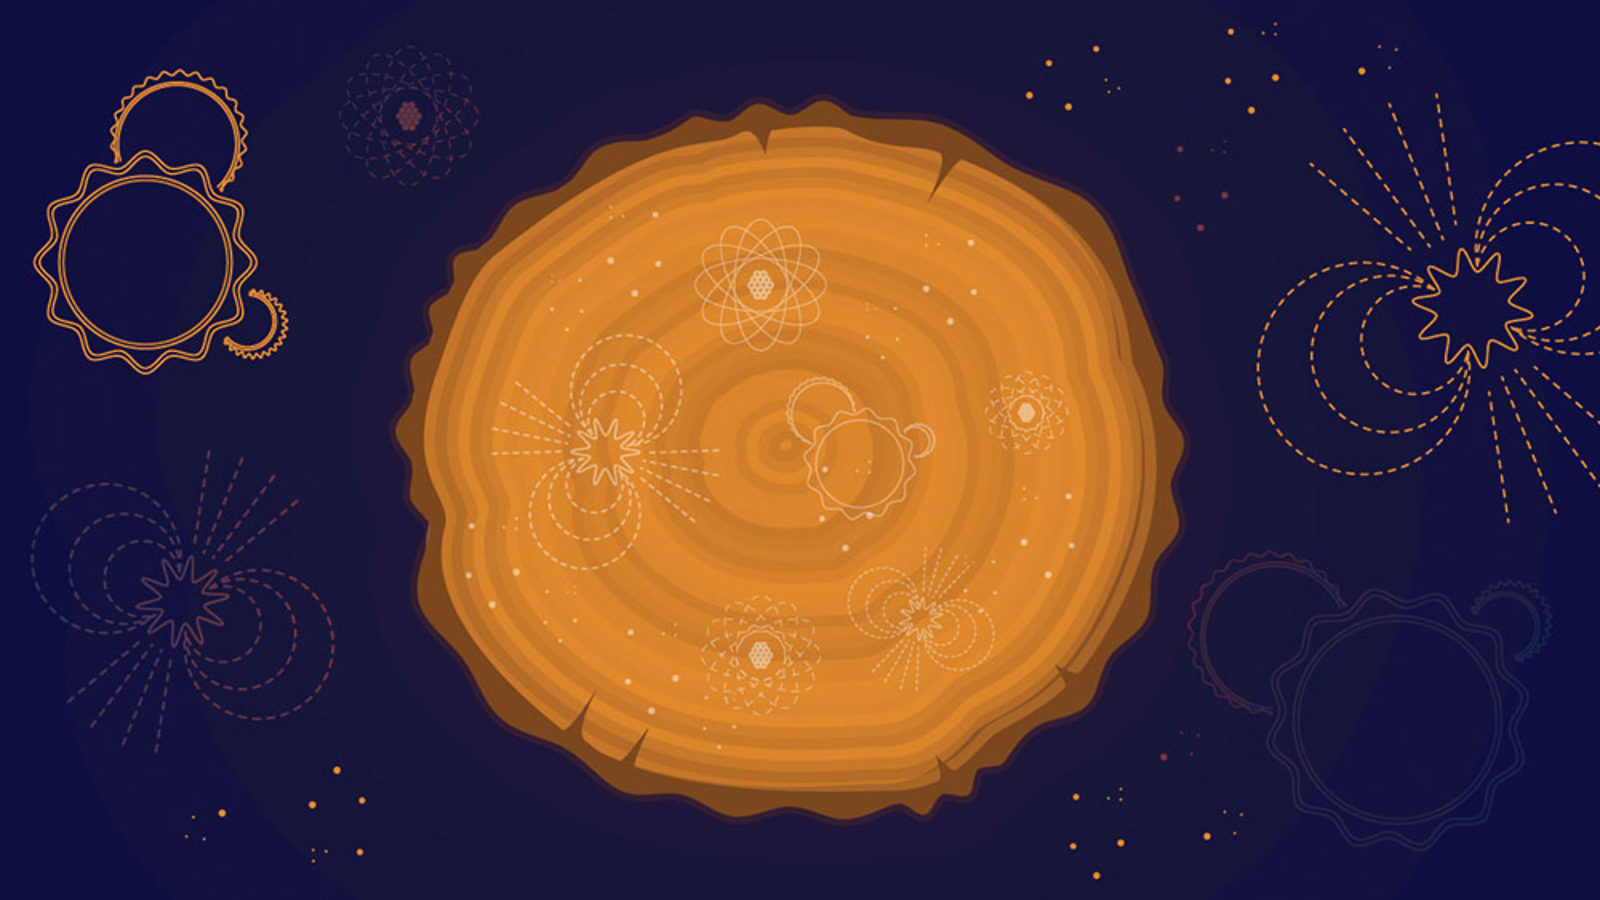 Illustration of world's oldest astronomers, rings in wood slice